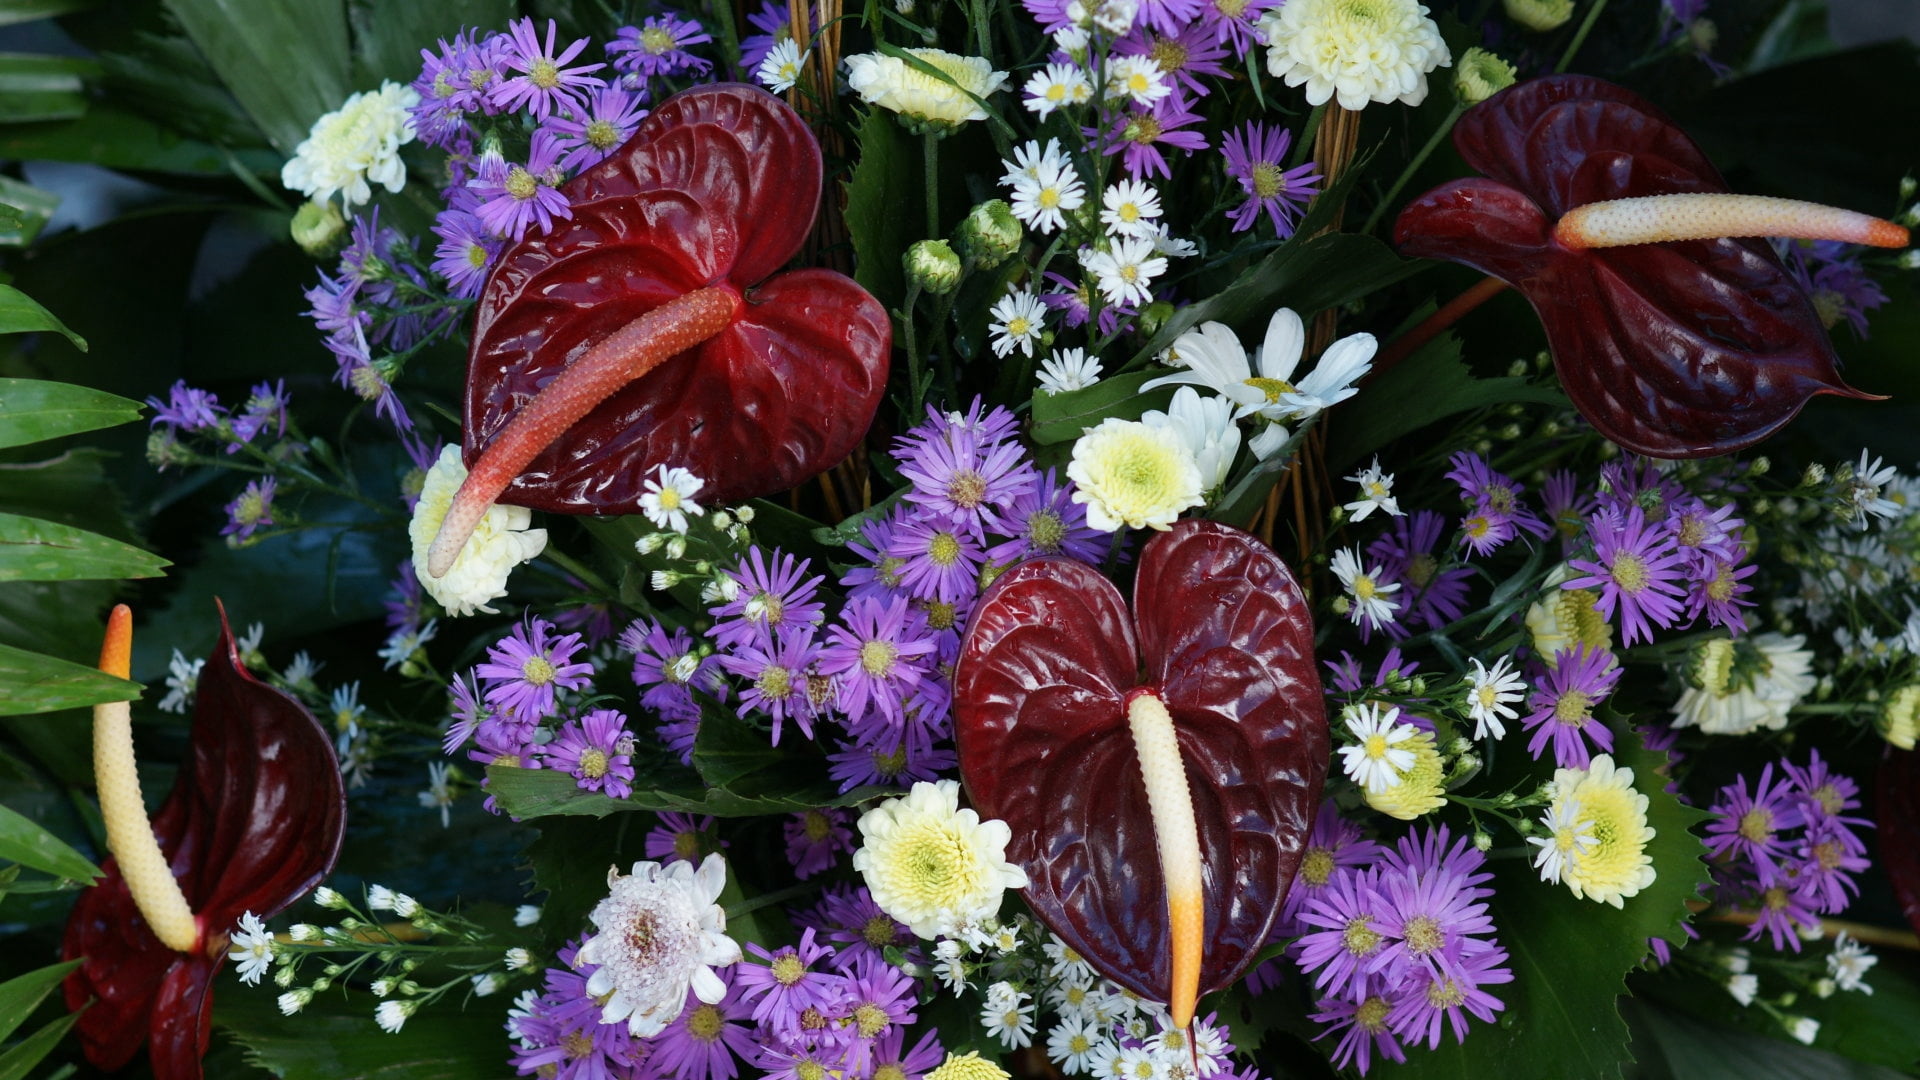 red flamingo lilies, purple asters and white mums and daisies